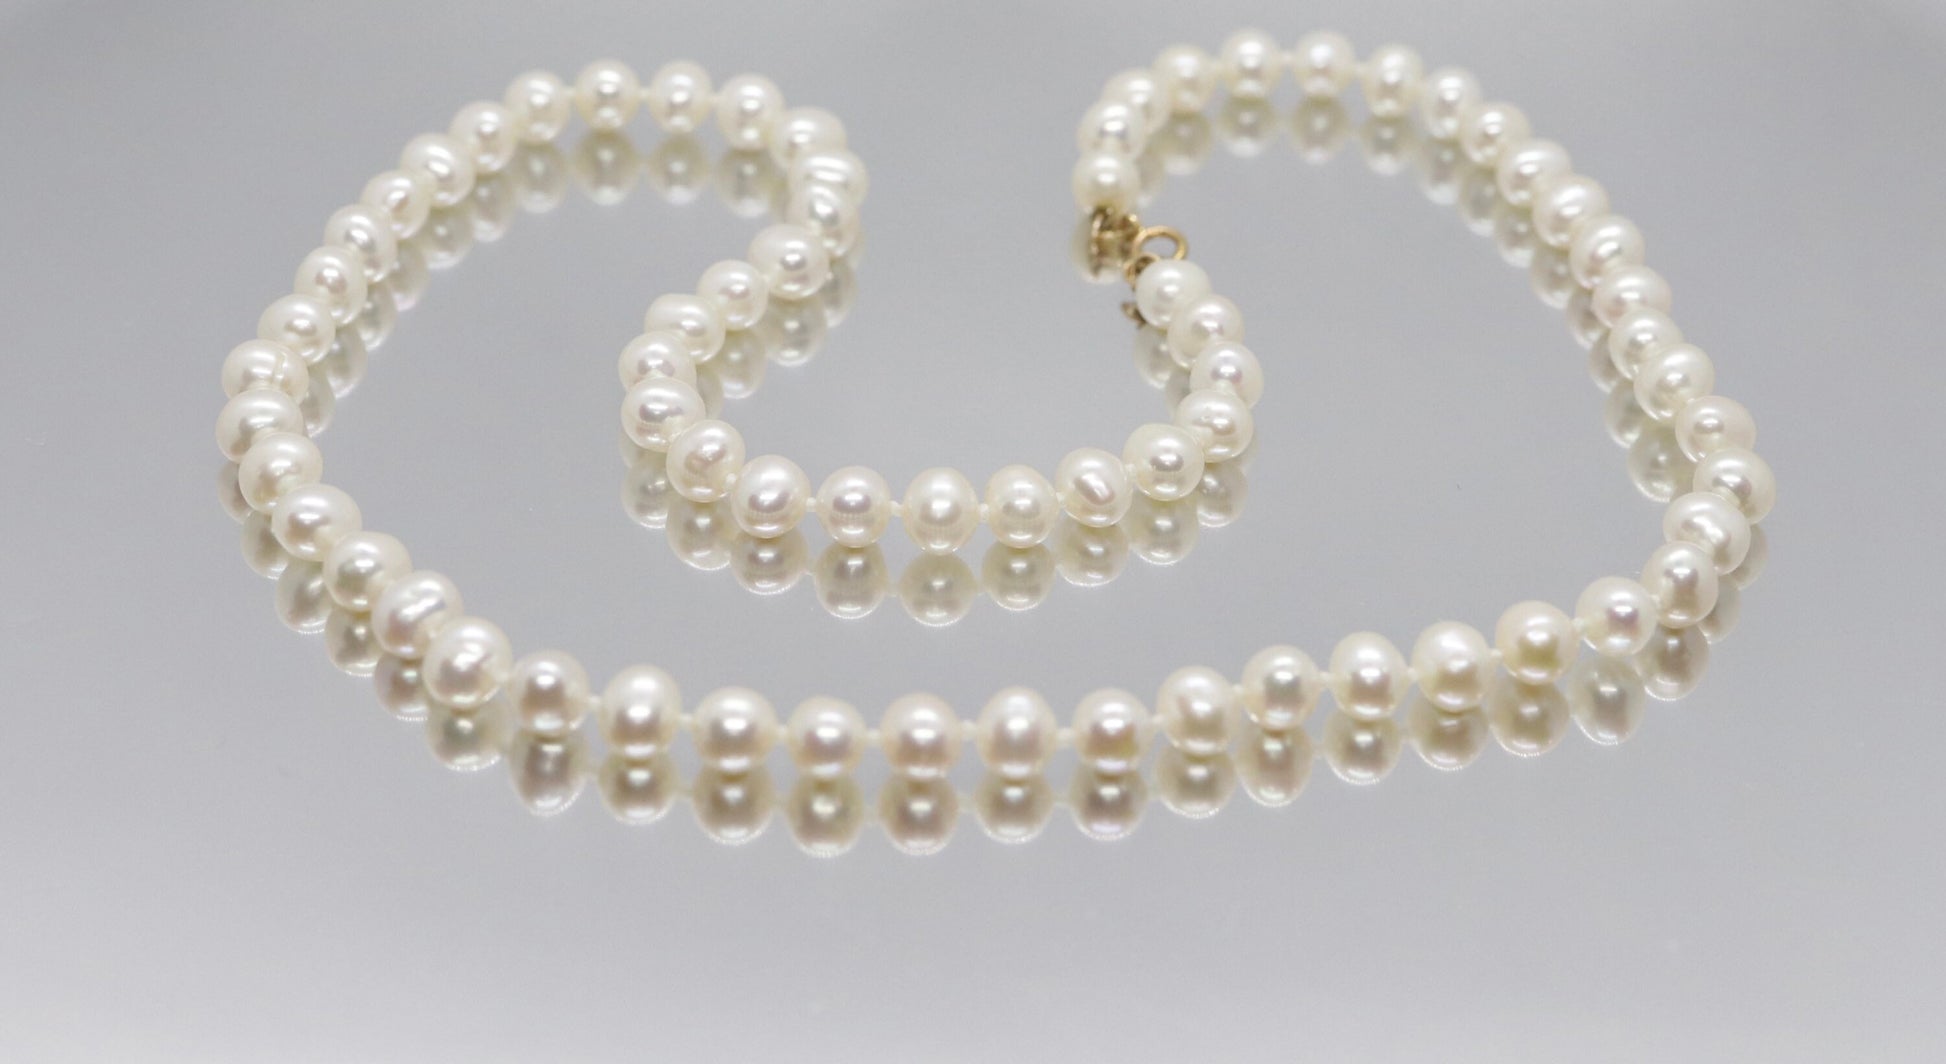 10k Freshwater Pearl Necklace. 18in length 6mm oval pearls